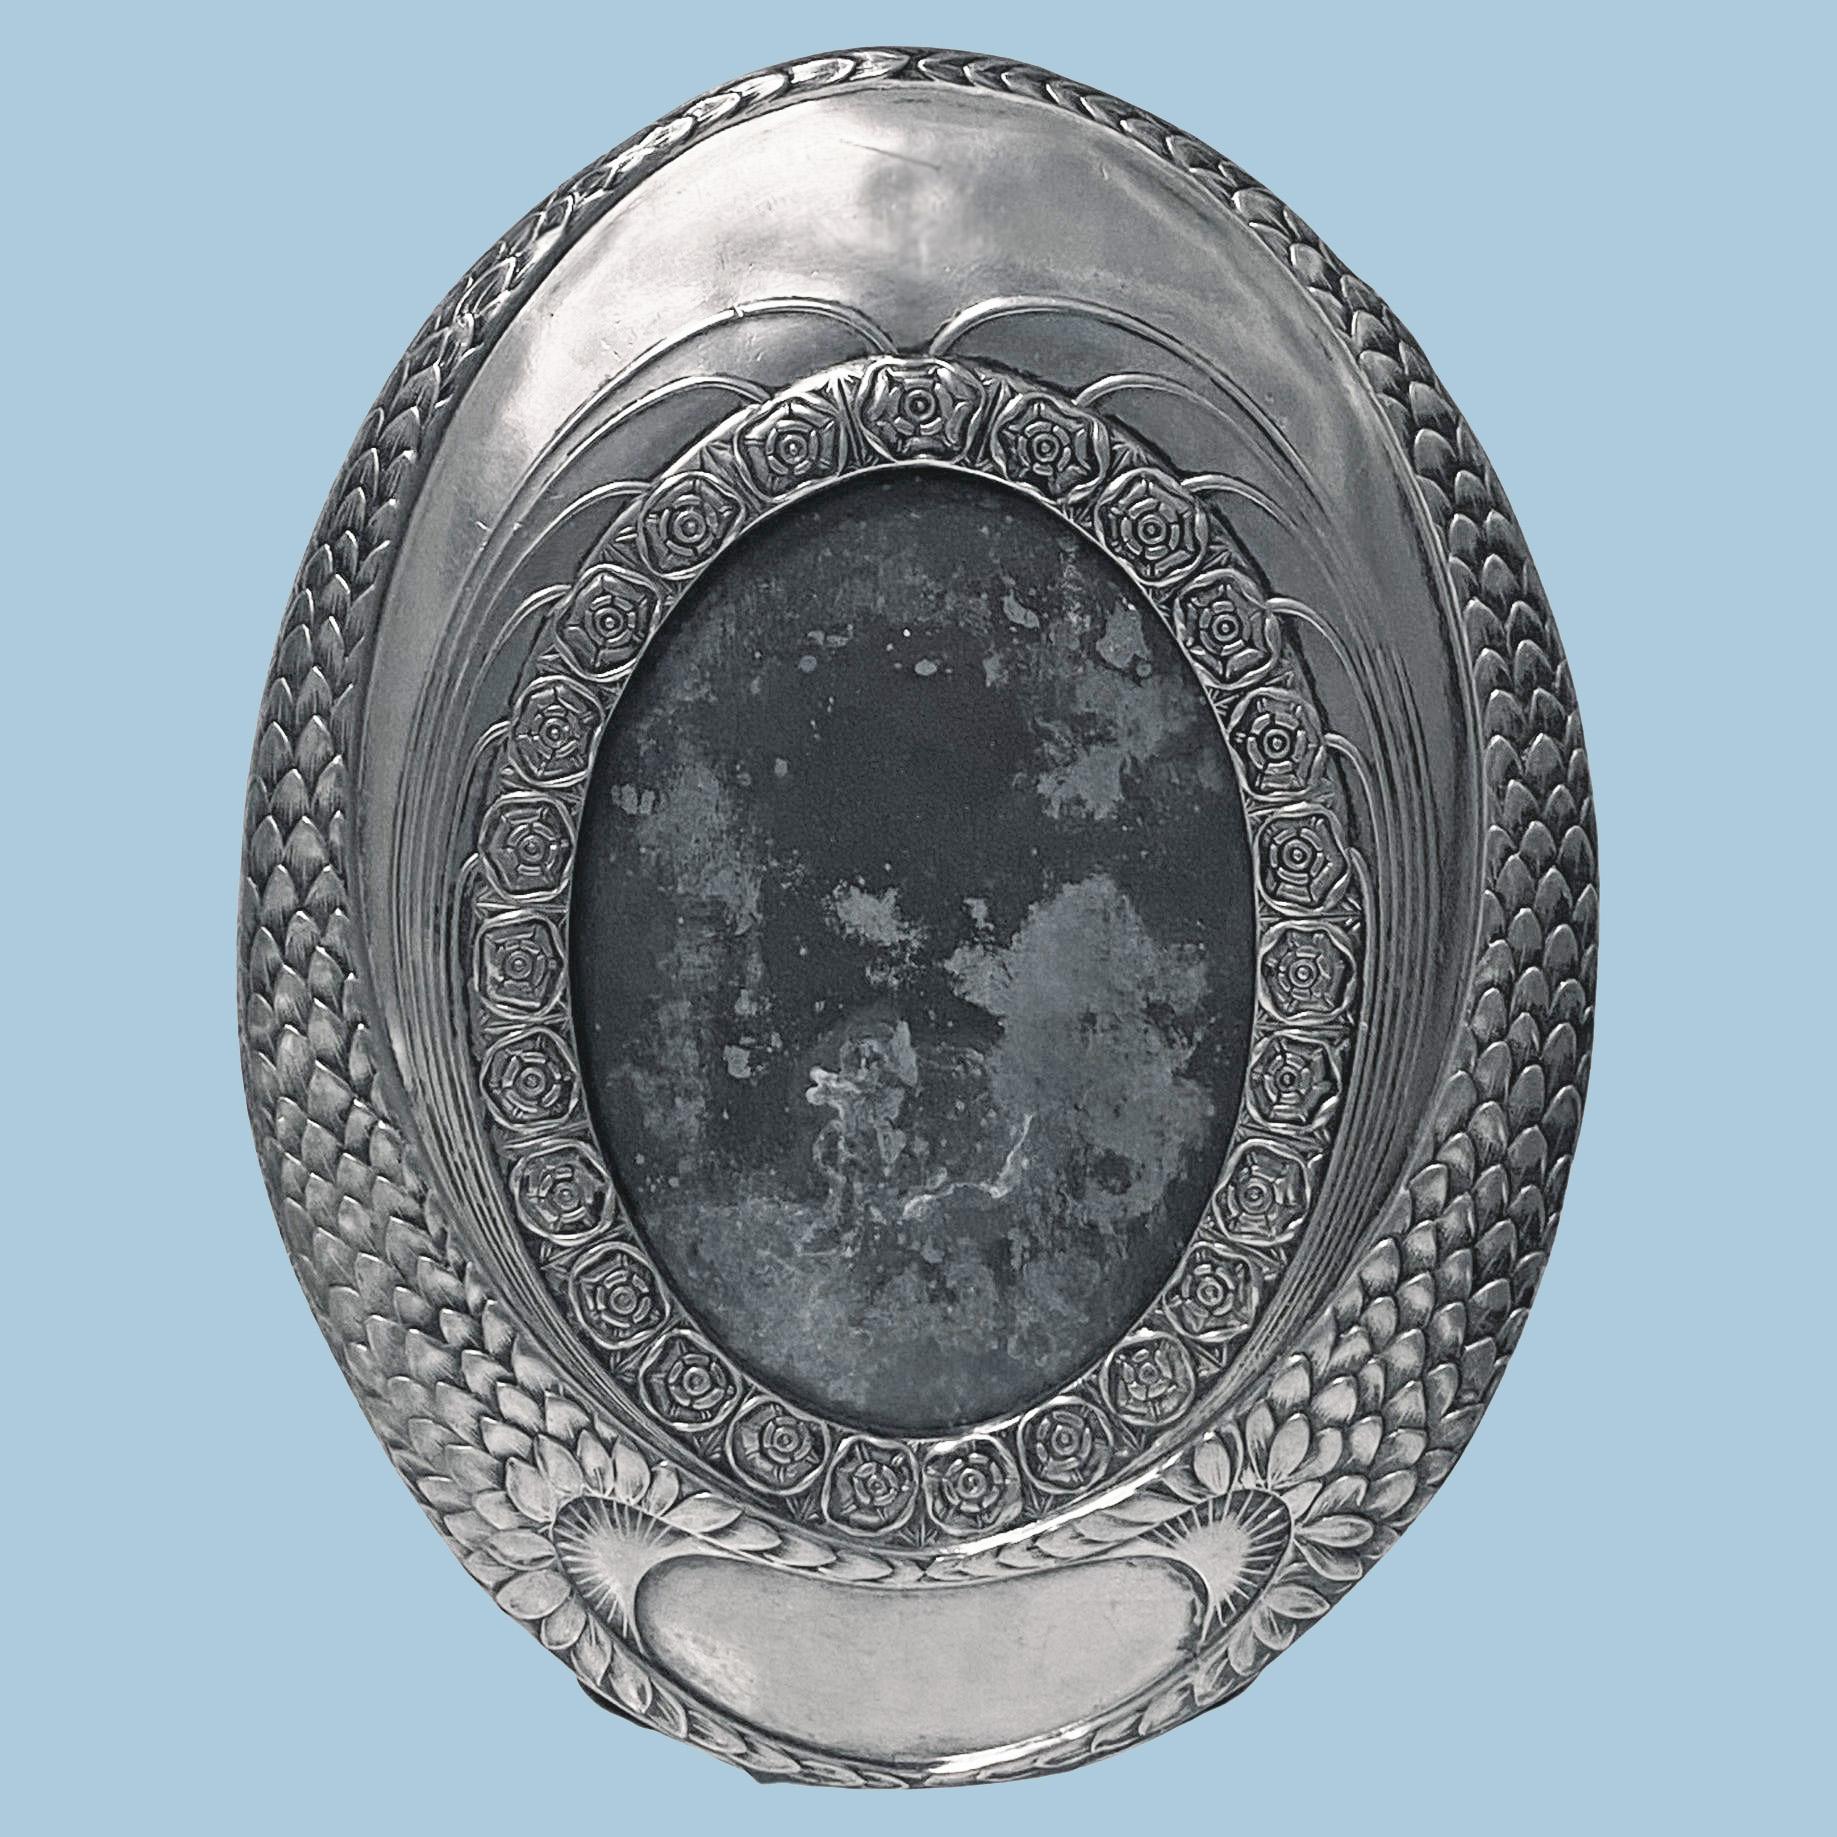 WMF large pewter oval photograph frame C.1910. Relief decorated with a band of roses within a border of overlapping leaves, WMF marks to reverse and B O/X and model number 98. Original back and easel. Overall: 10.00 x 7.50 inches. Image size: 5.50 x